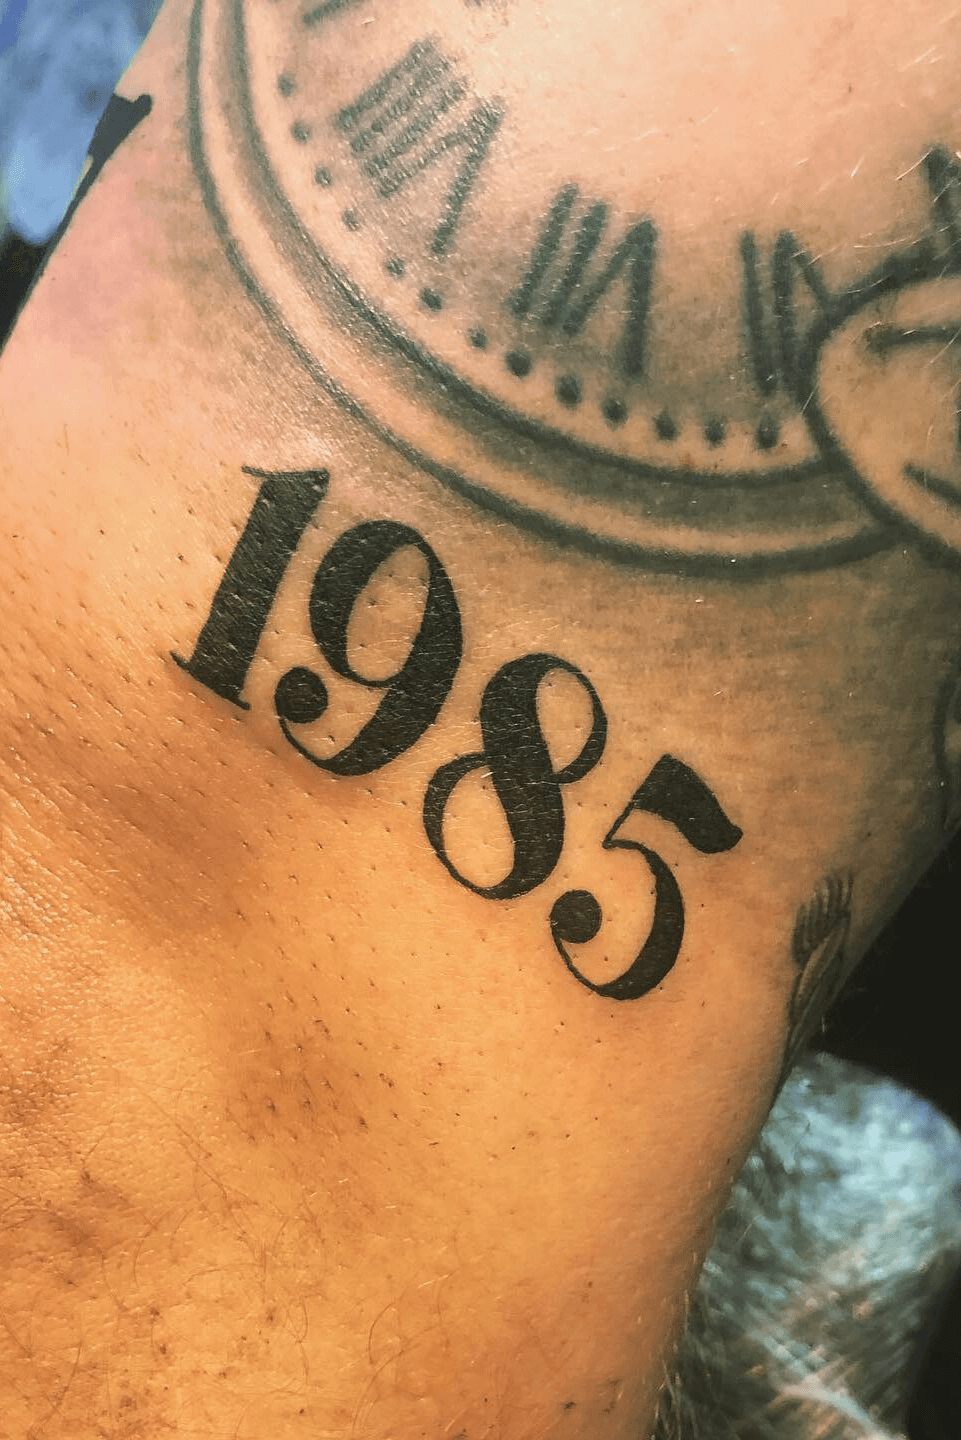 Tattoo uploaded by Steve Humpherson  Date of birth in traditional bold font   Tattoodo